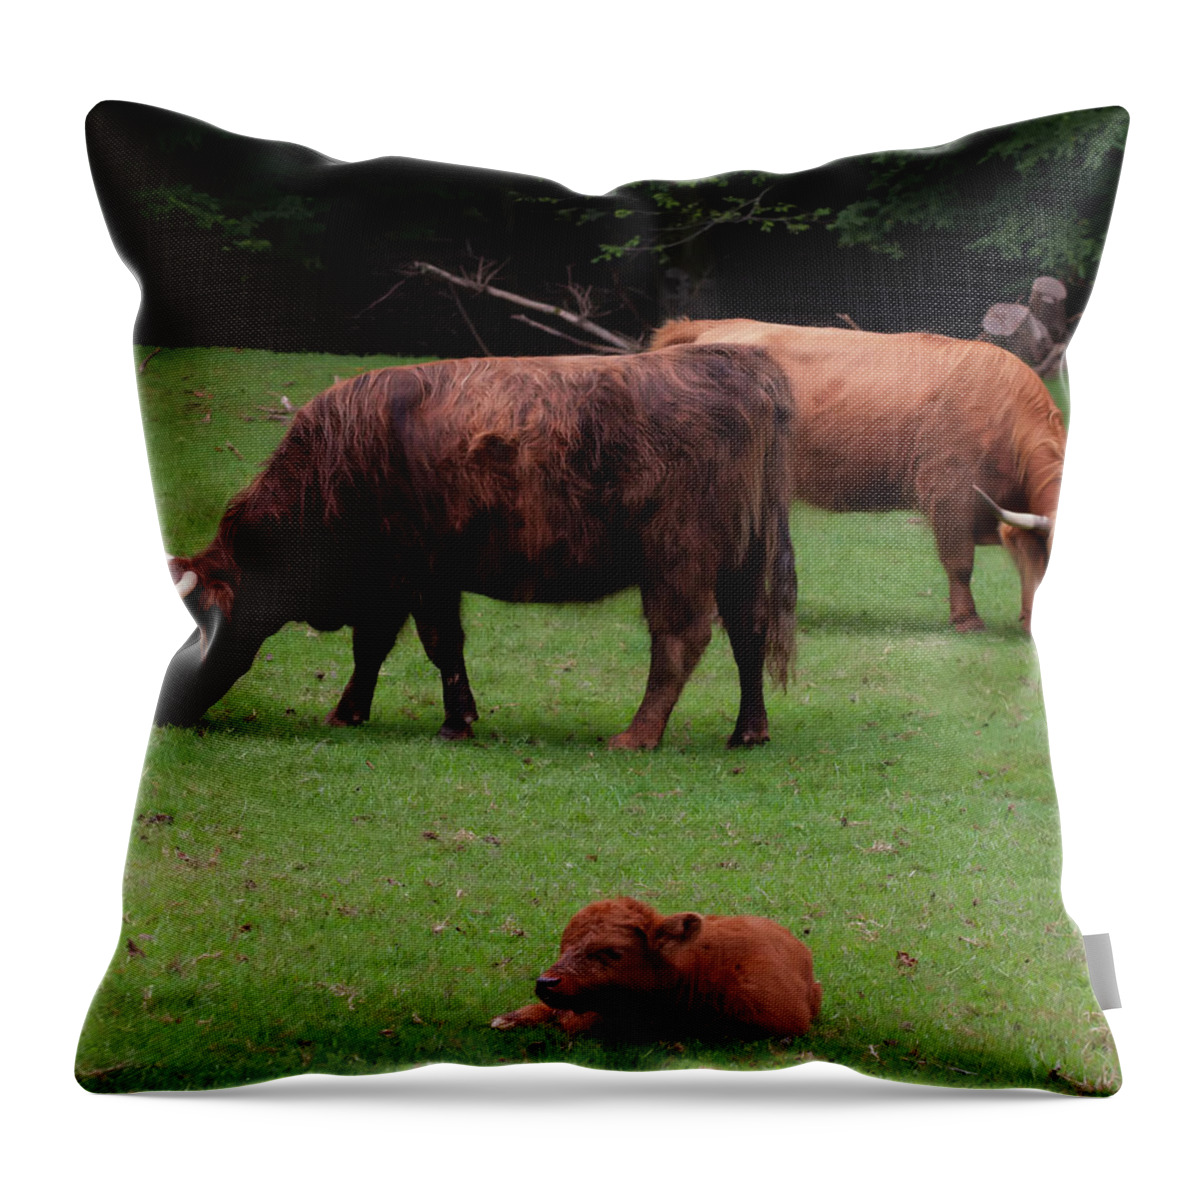 Scottish Highlands Cattle Throw Pillow featuring the photograph Highlands Cattle And Calf by Flees Photos